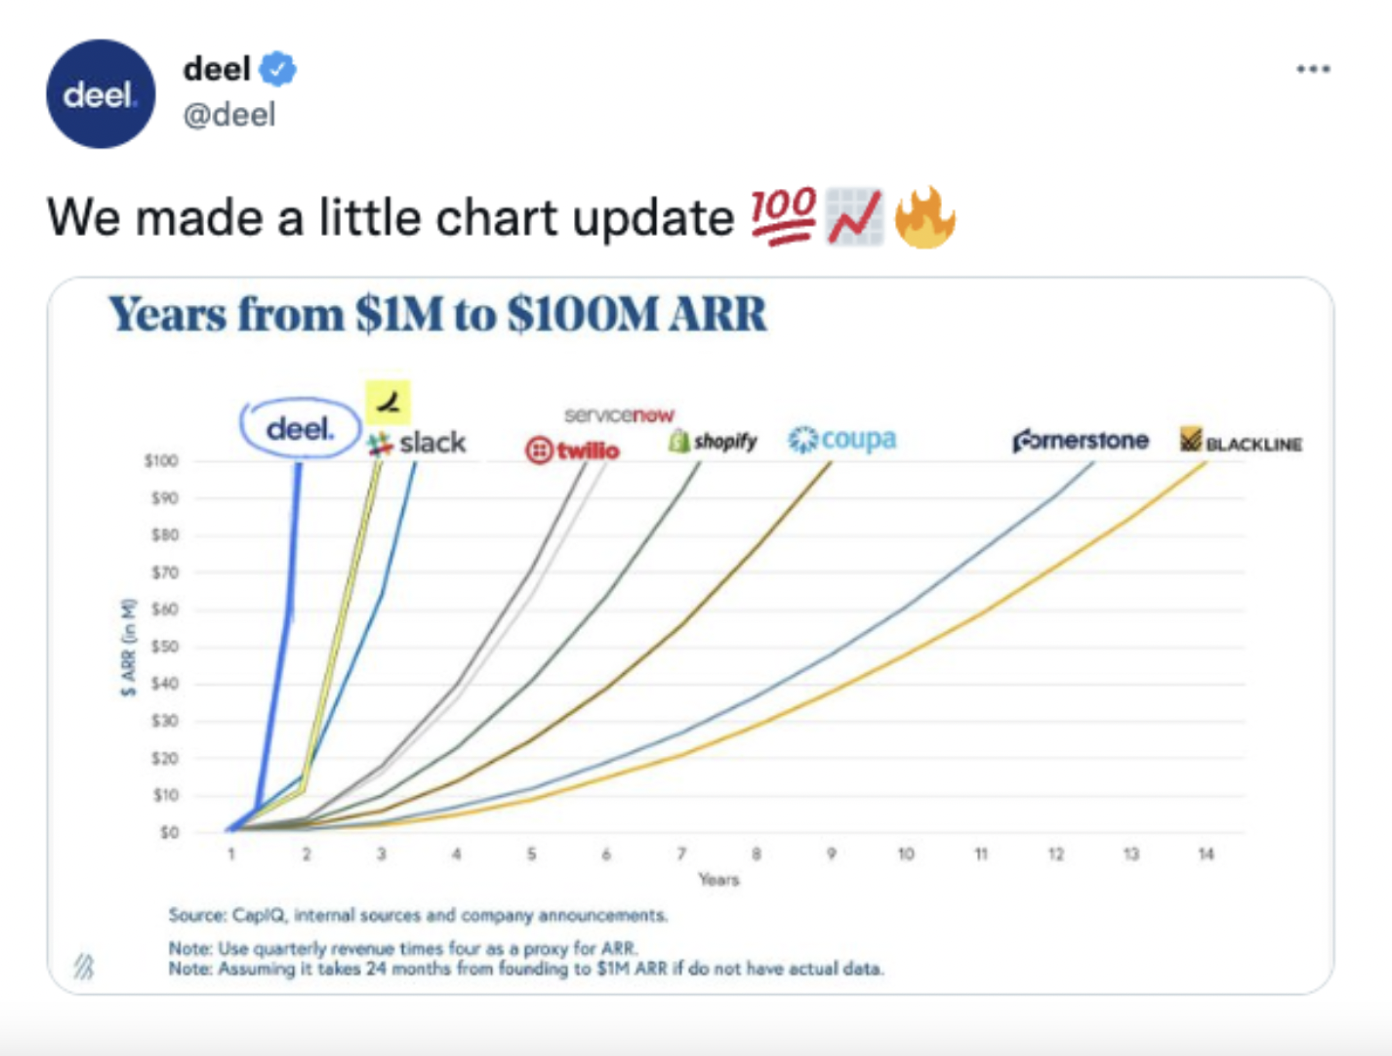 Deels growth shown on a chart that they tweeted